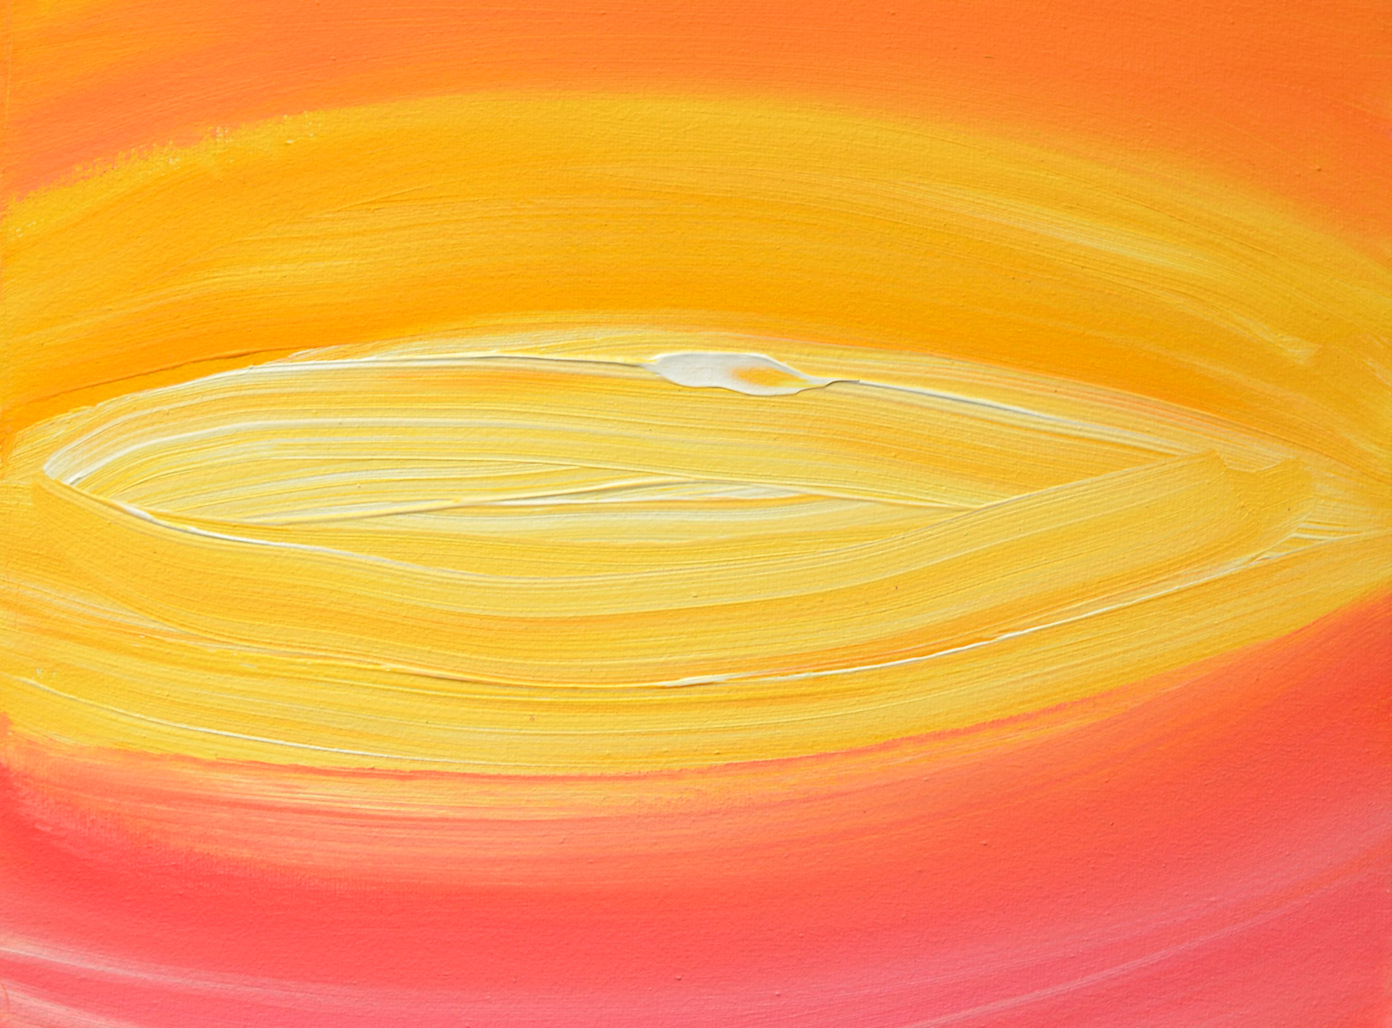 An abstract painting. Lines of orange curve to the top of the frame, while lines of coral pink curve to the bottom the frame, forming an almond shape at the center.